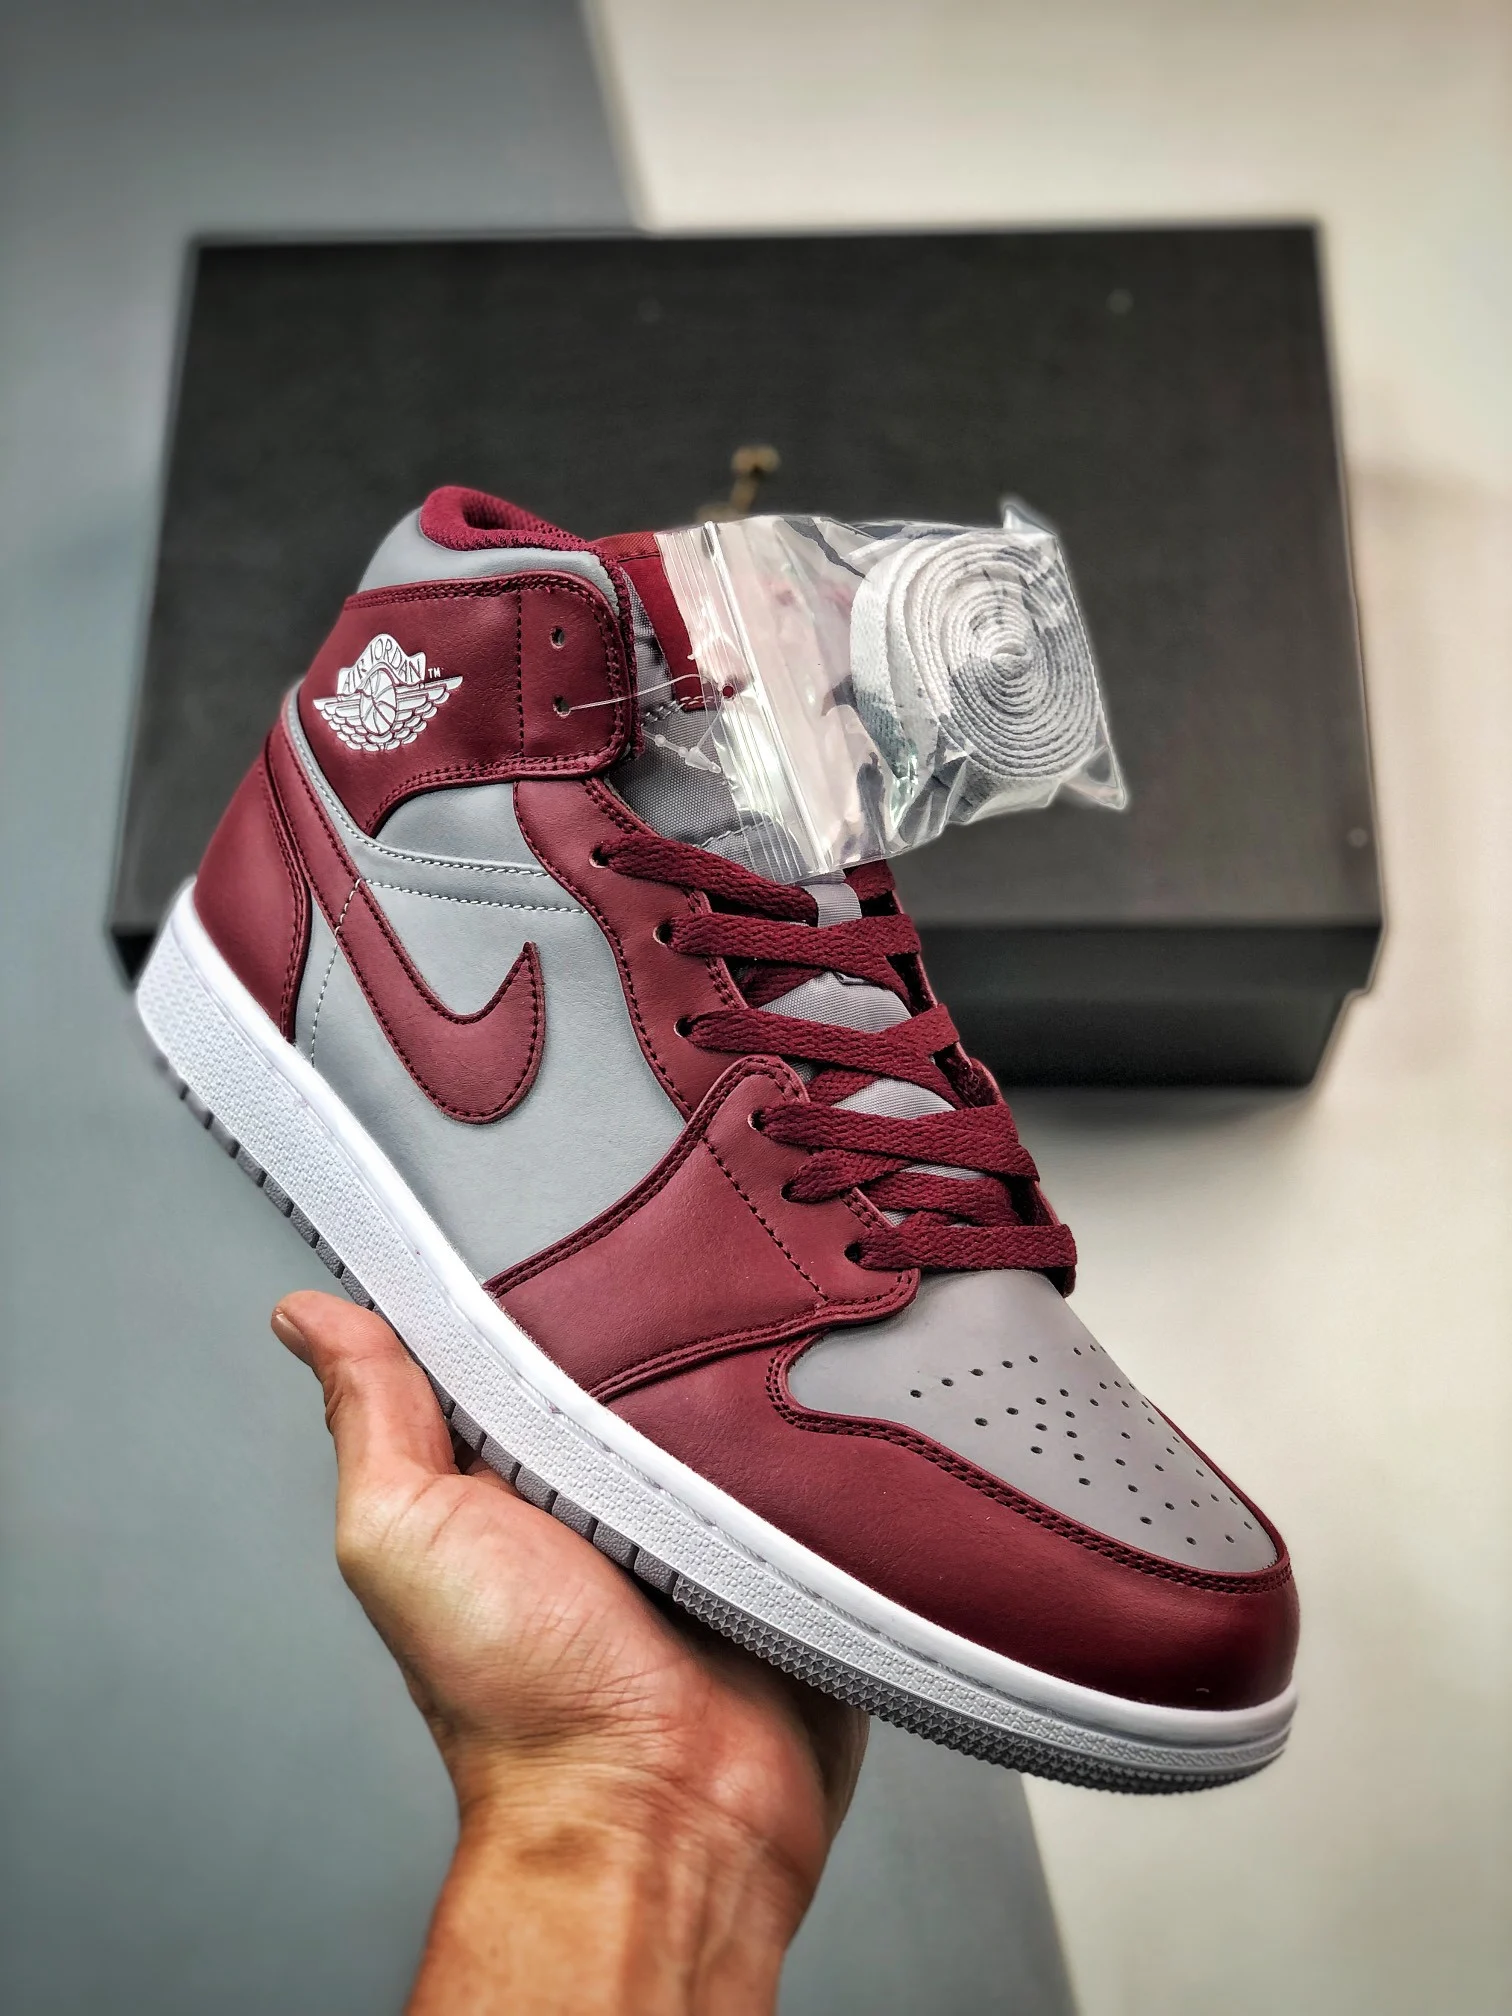 Air Jordan 1 Mid Cherrywood Red Cement Grey White For Sale